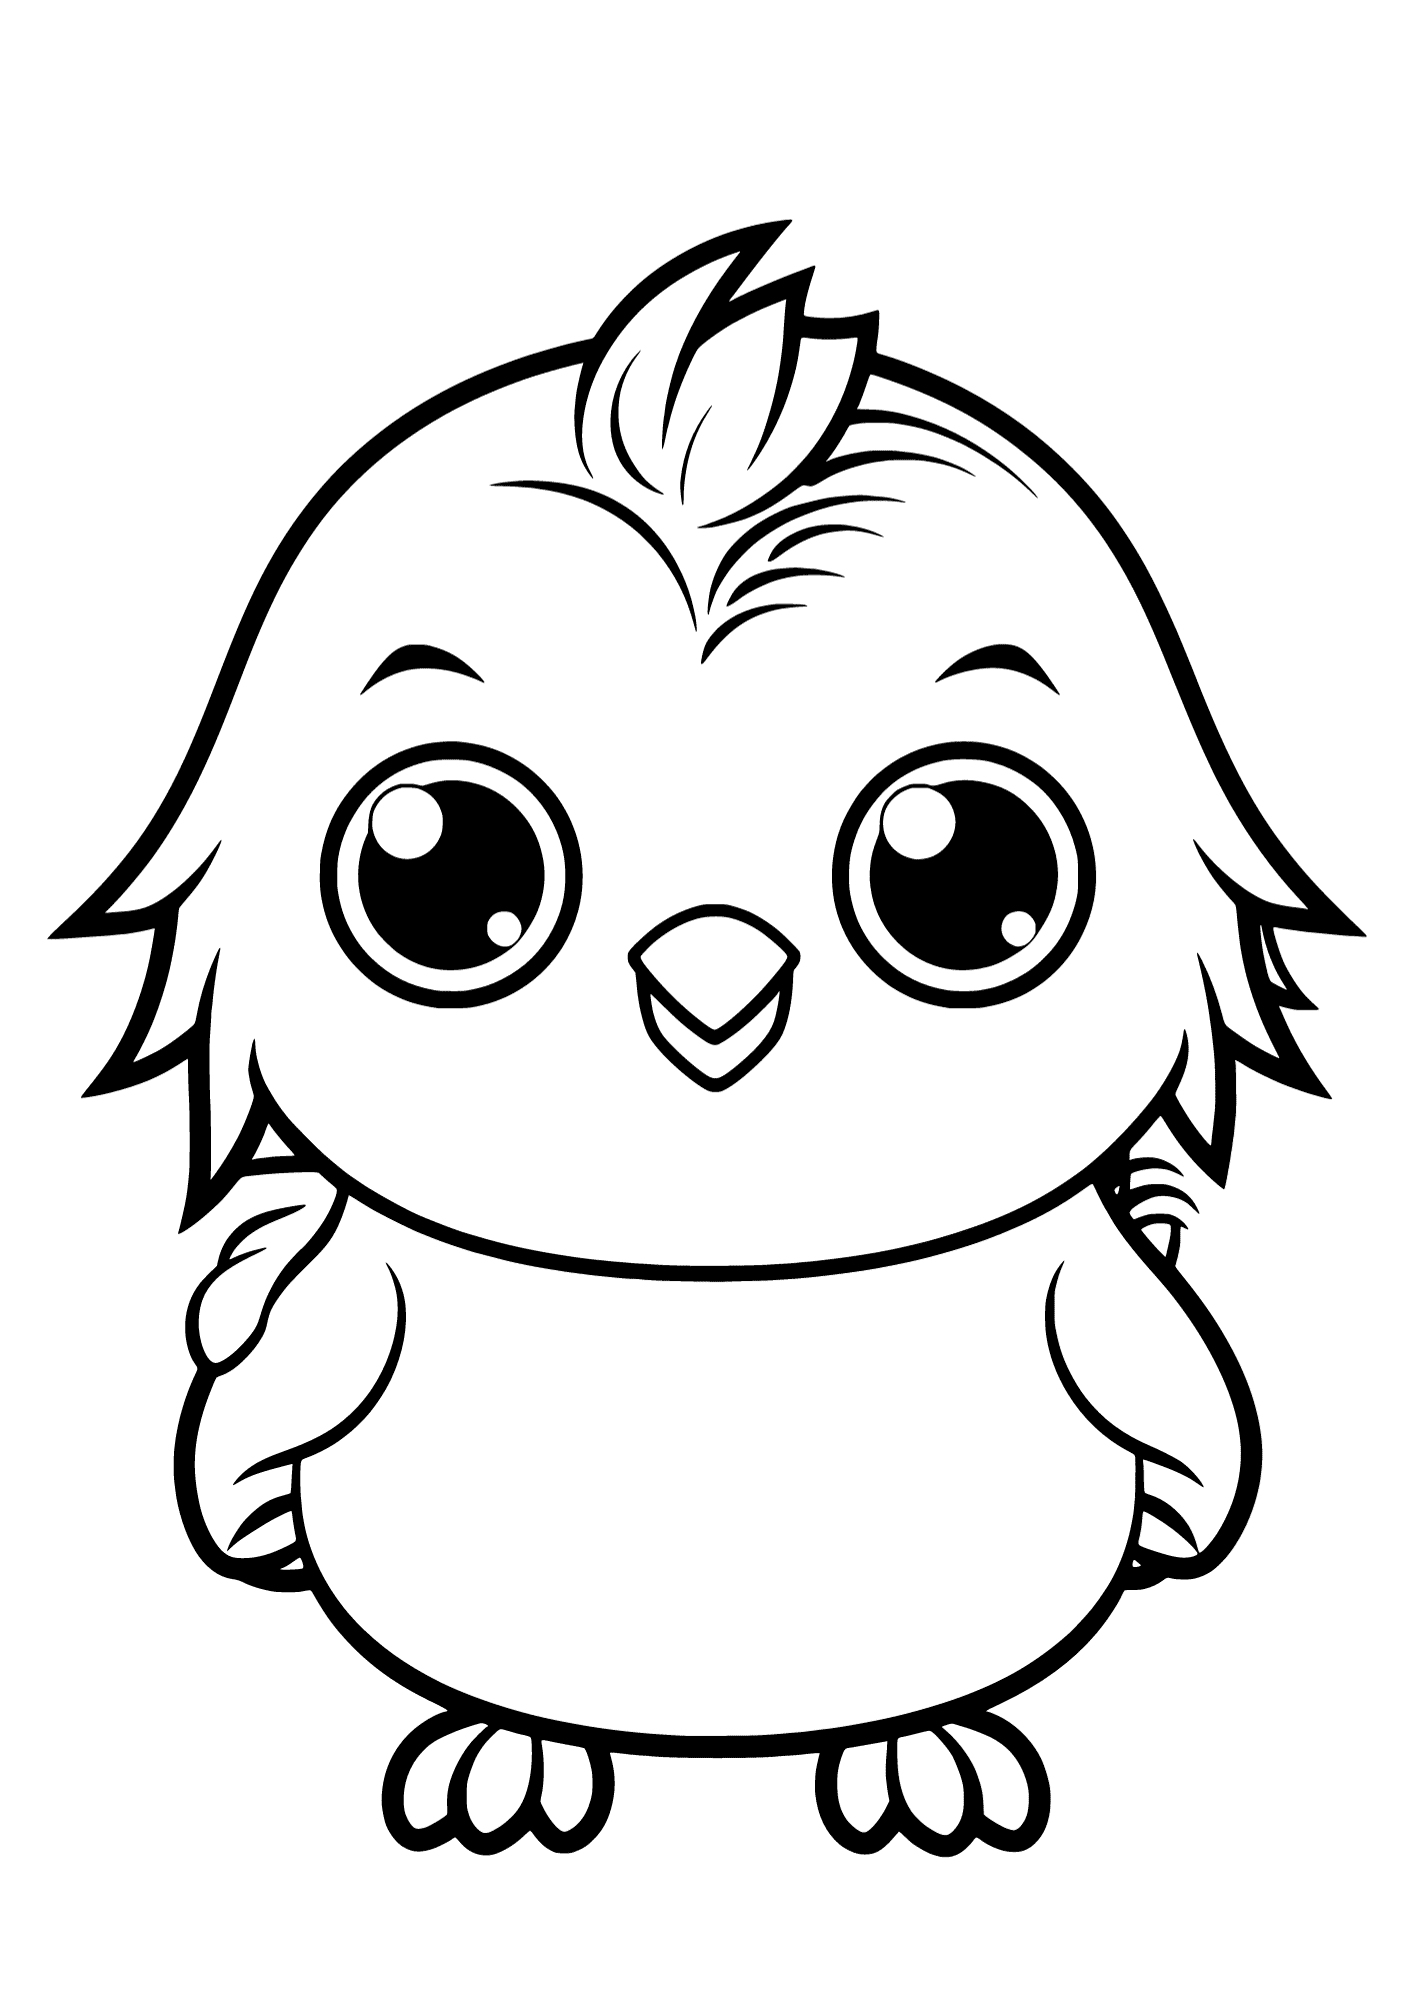 Chick To Color Free